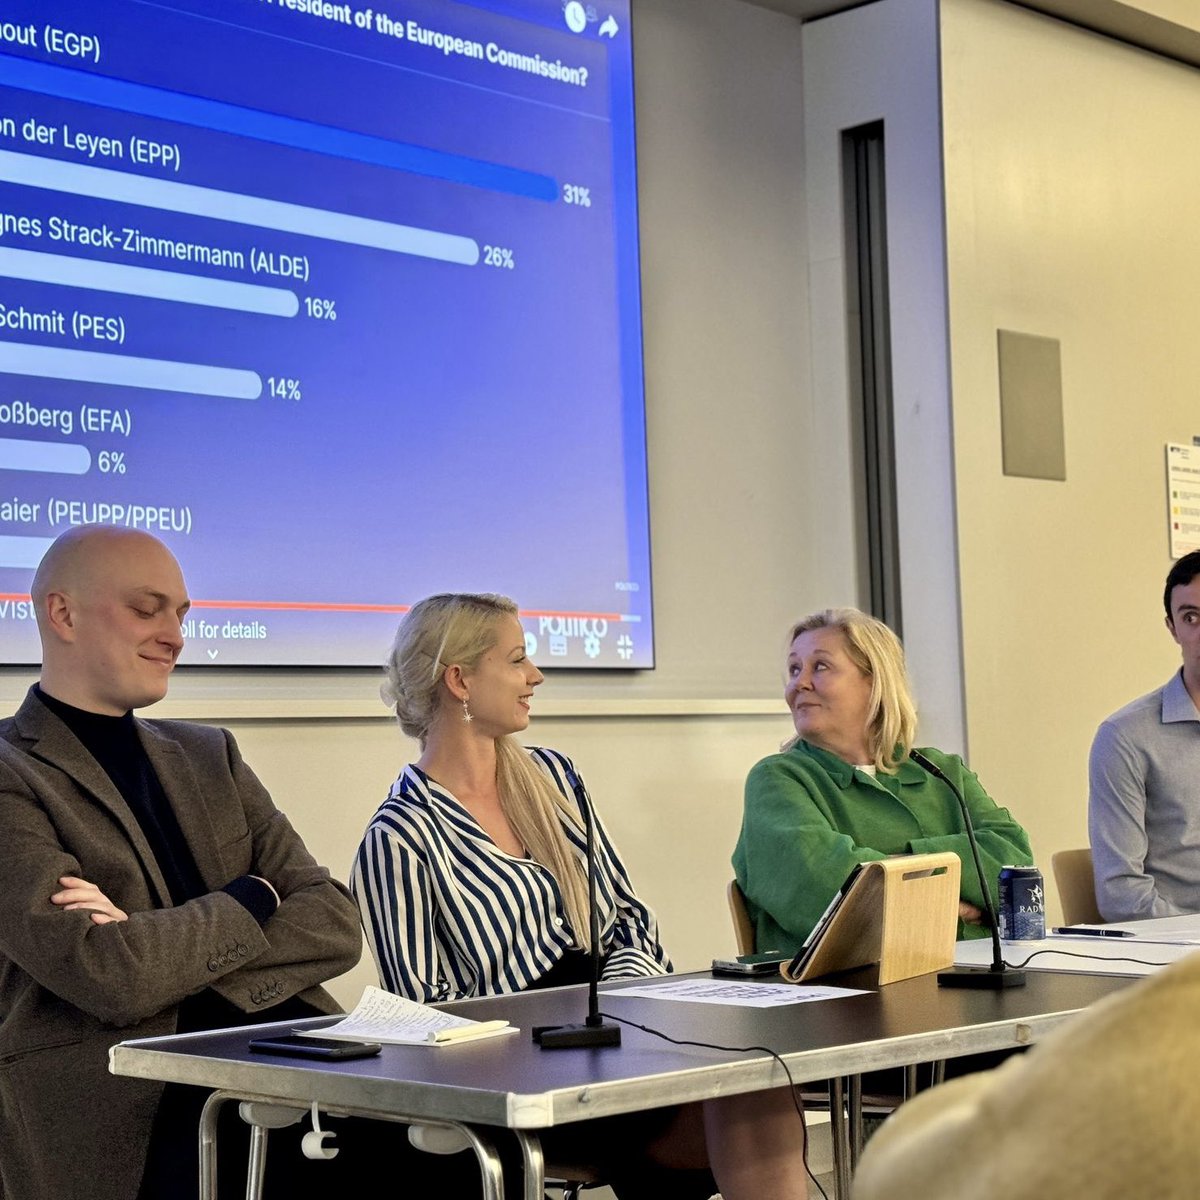 Closing a very special day in style! We entered the final few weeks before #euelections2024 publishing our elections video with a very important message to pass on, and joining a viewing of the candidates debate at @UCL_EI yesterday.